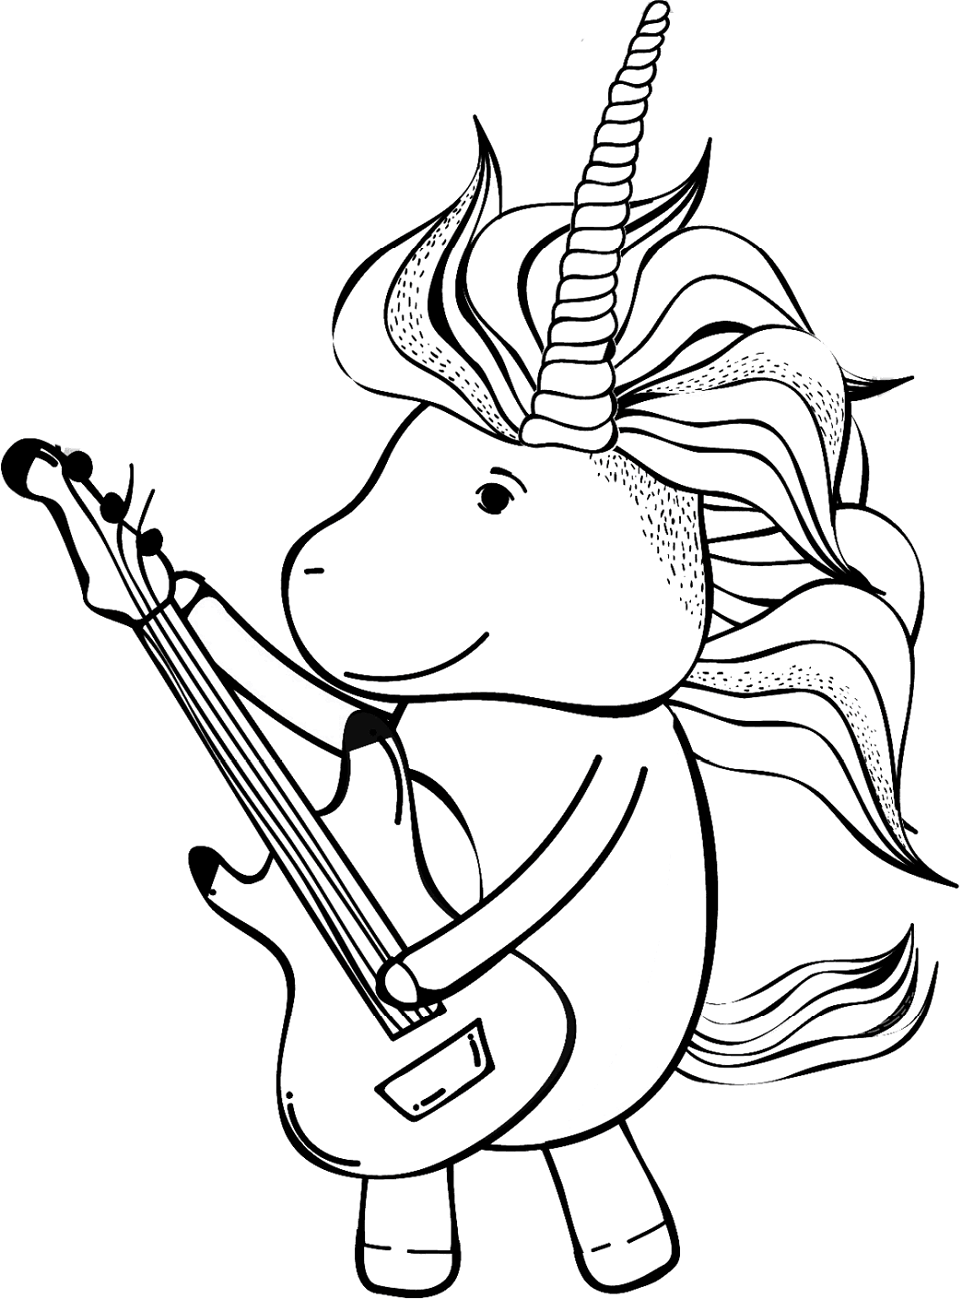 Unicorn Playing Guitar Coloring Page